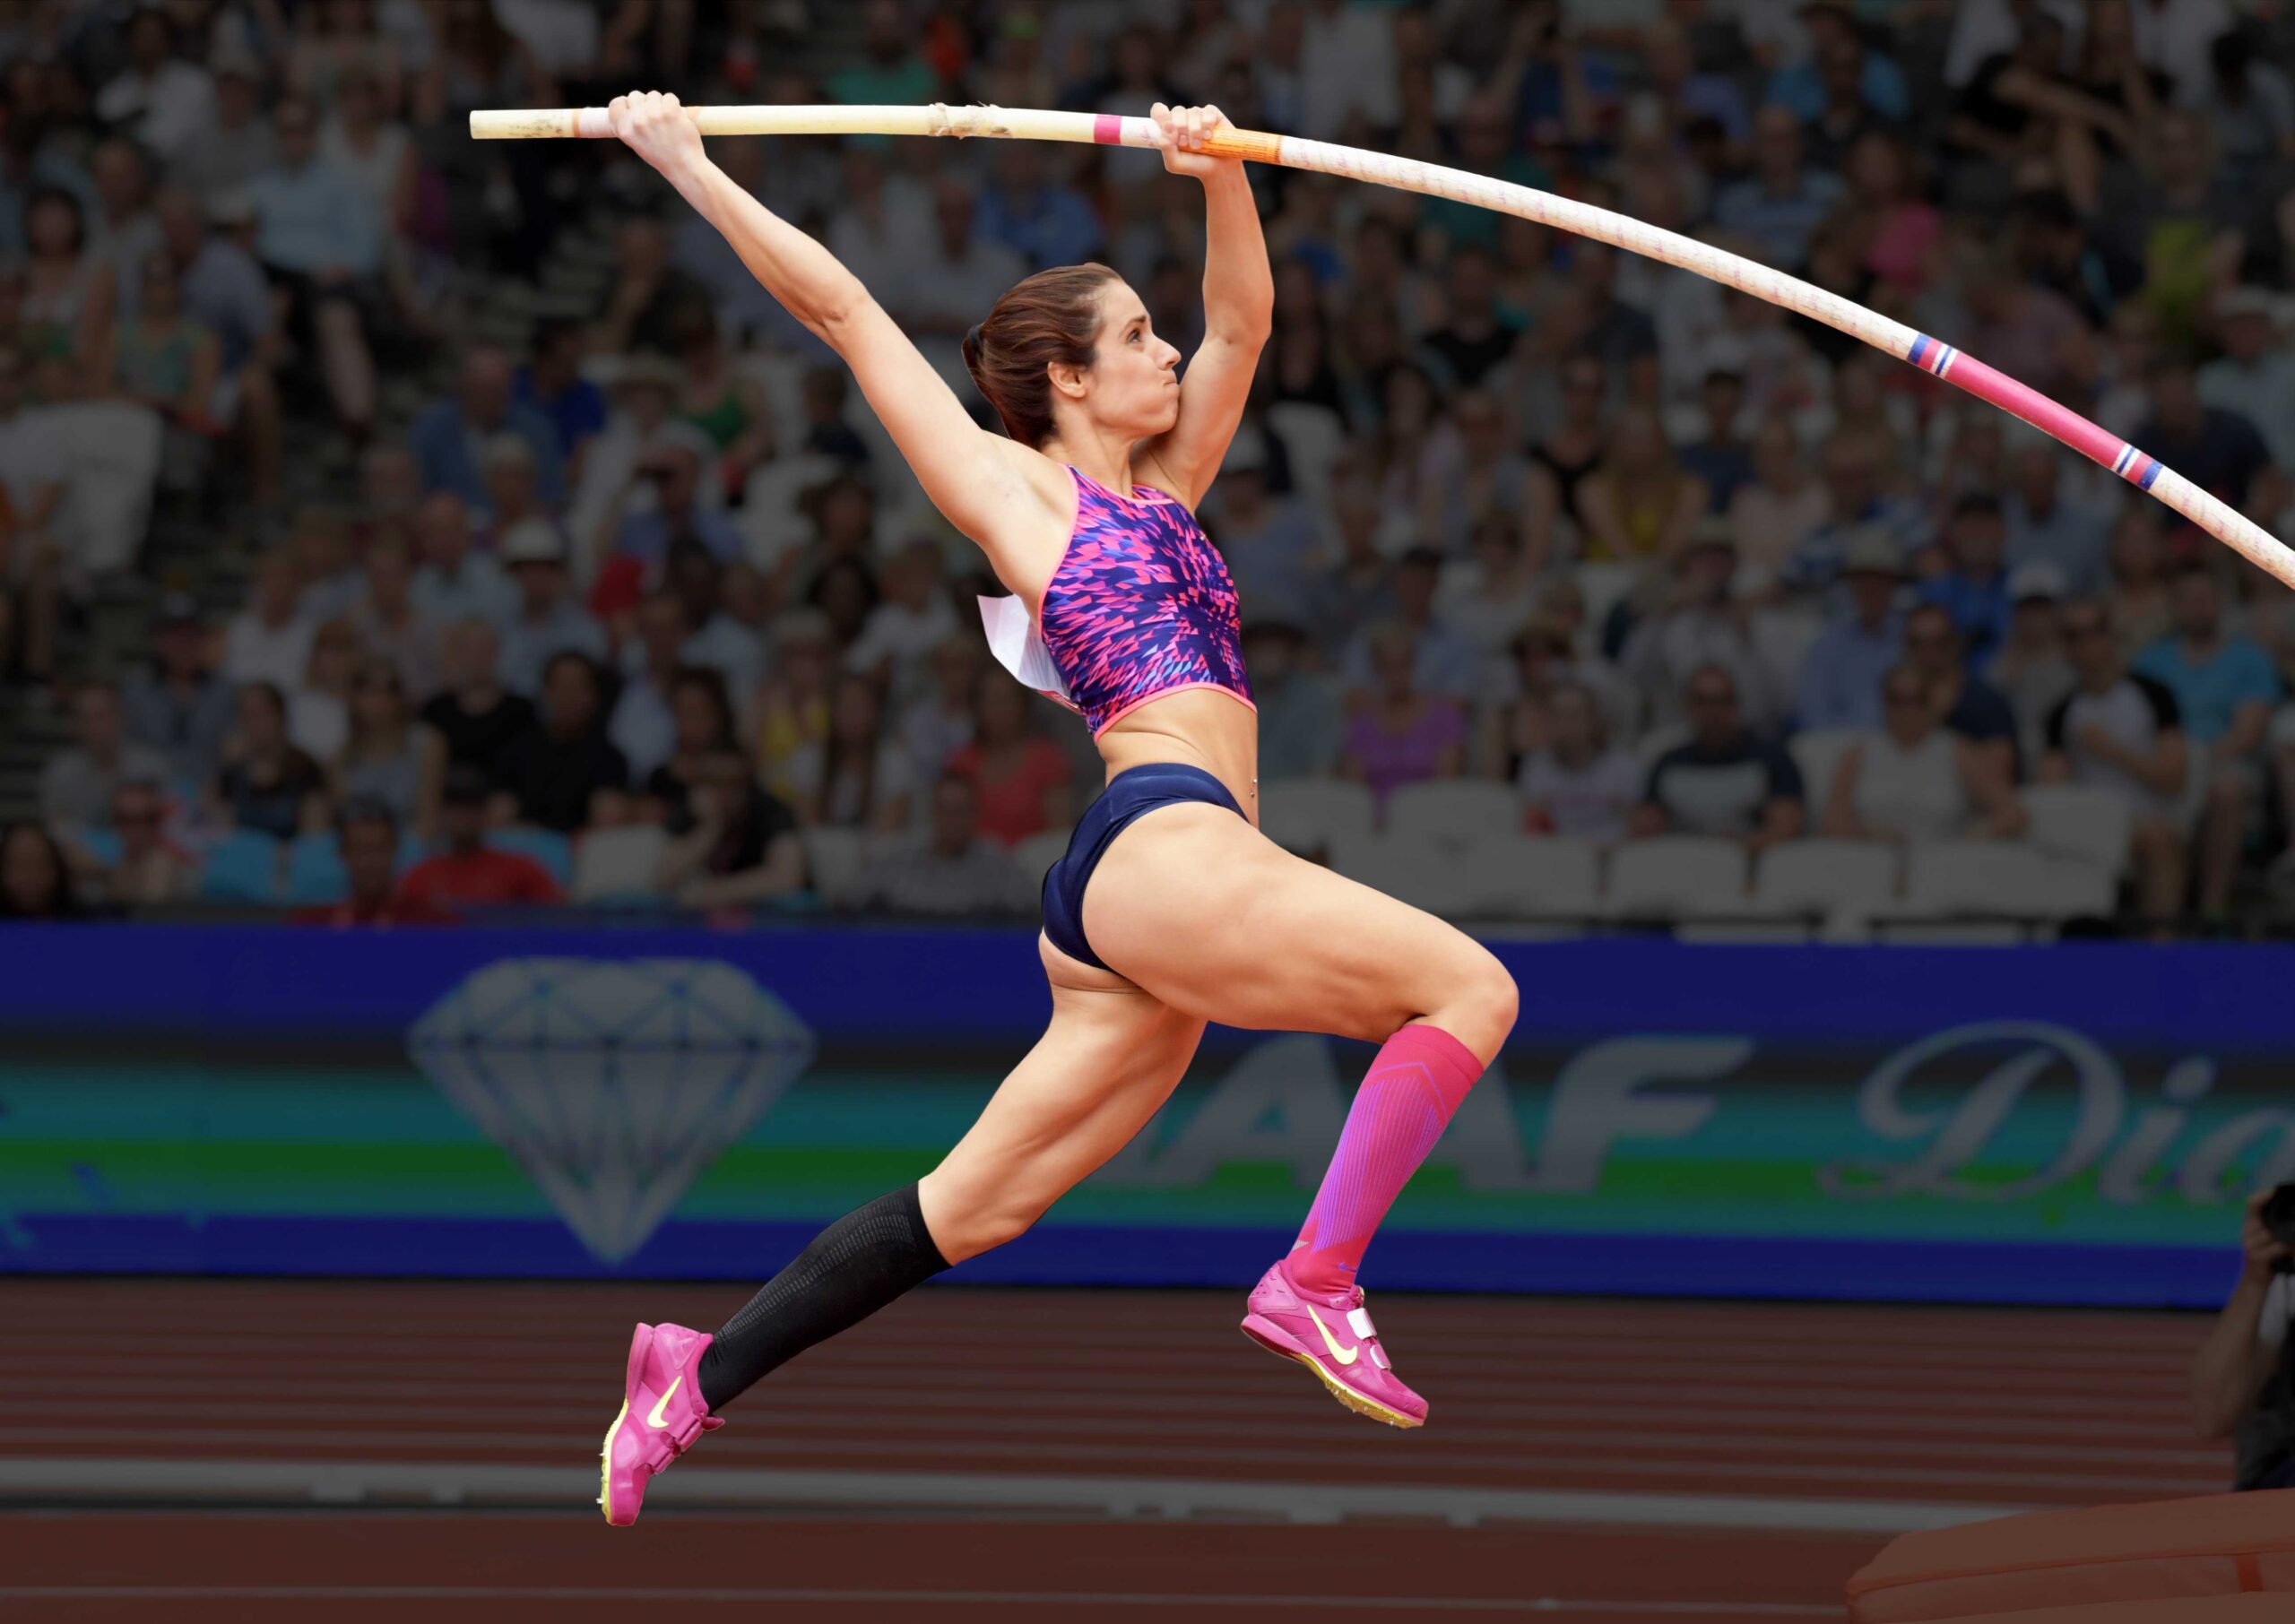 Greek National Pole Vault Record Holder and Olympic Champion vaulting with Spirit Vaulting Poles